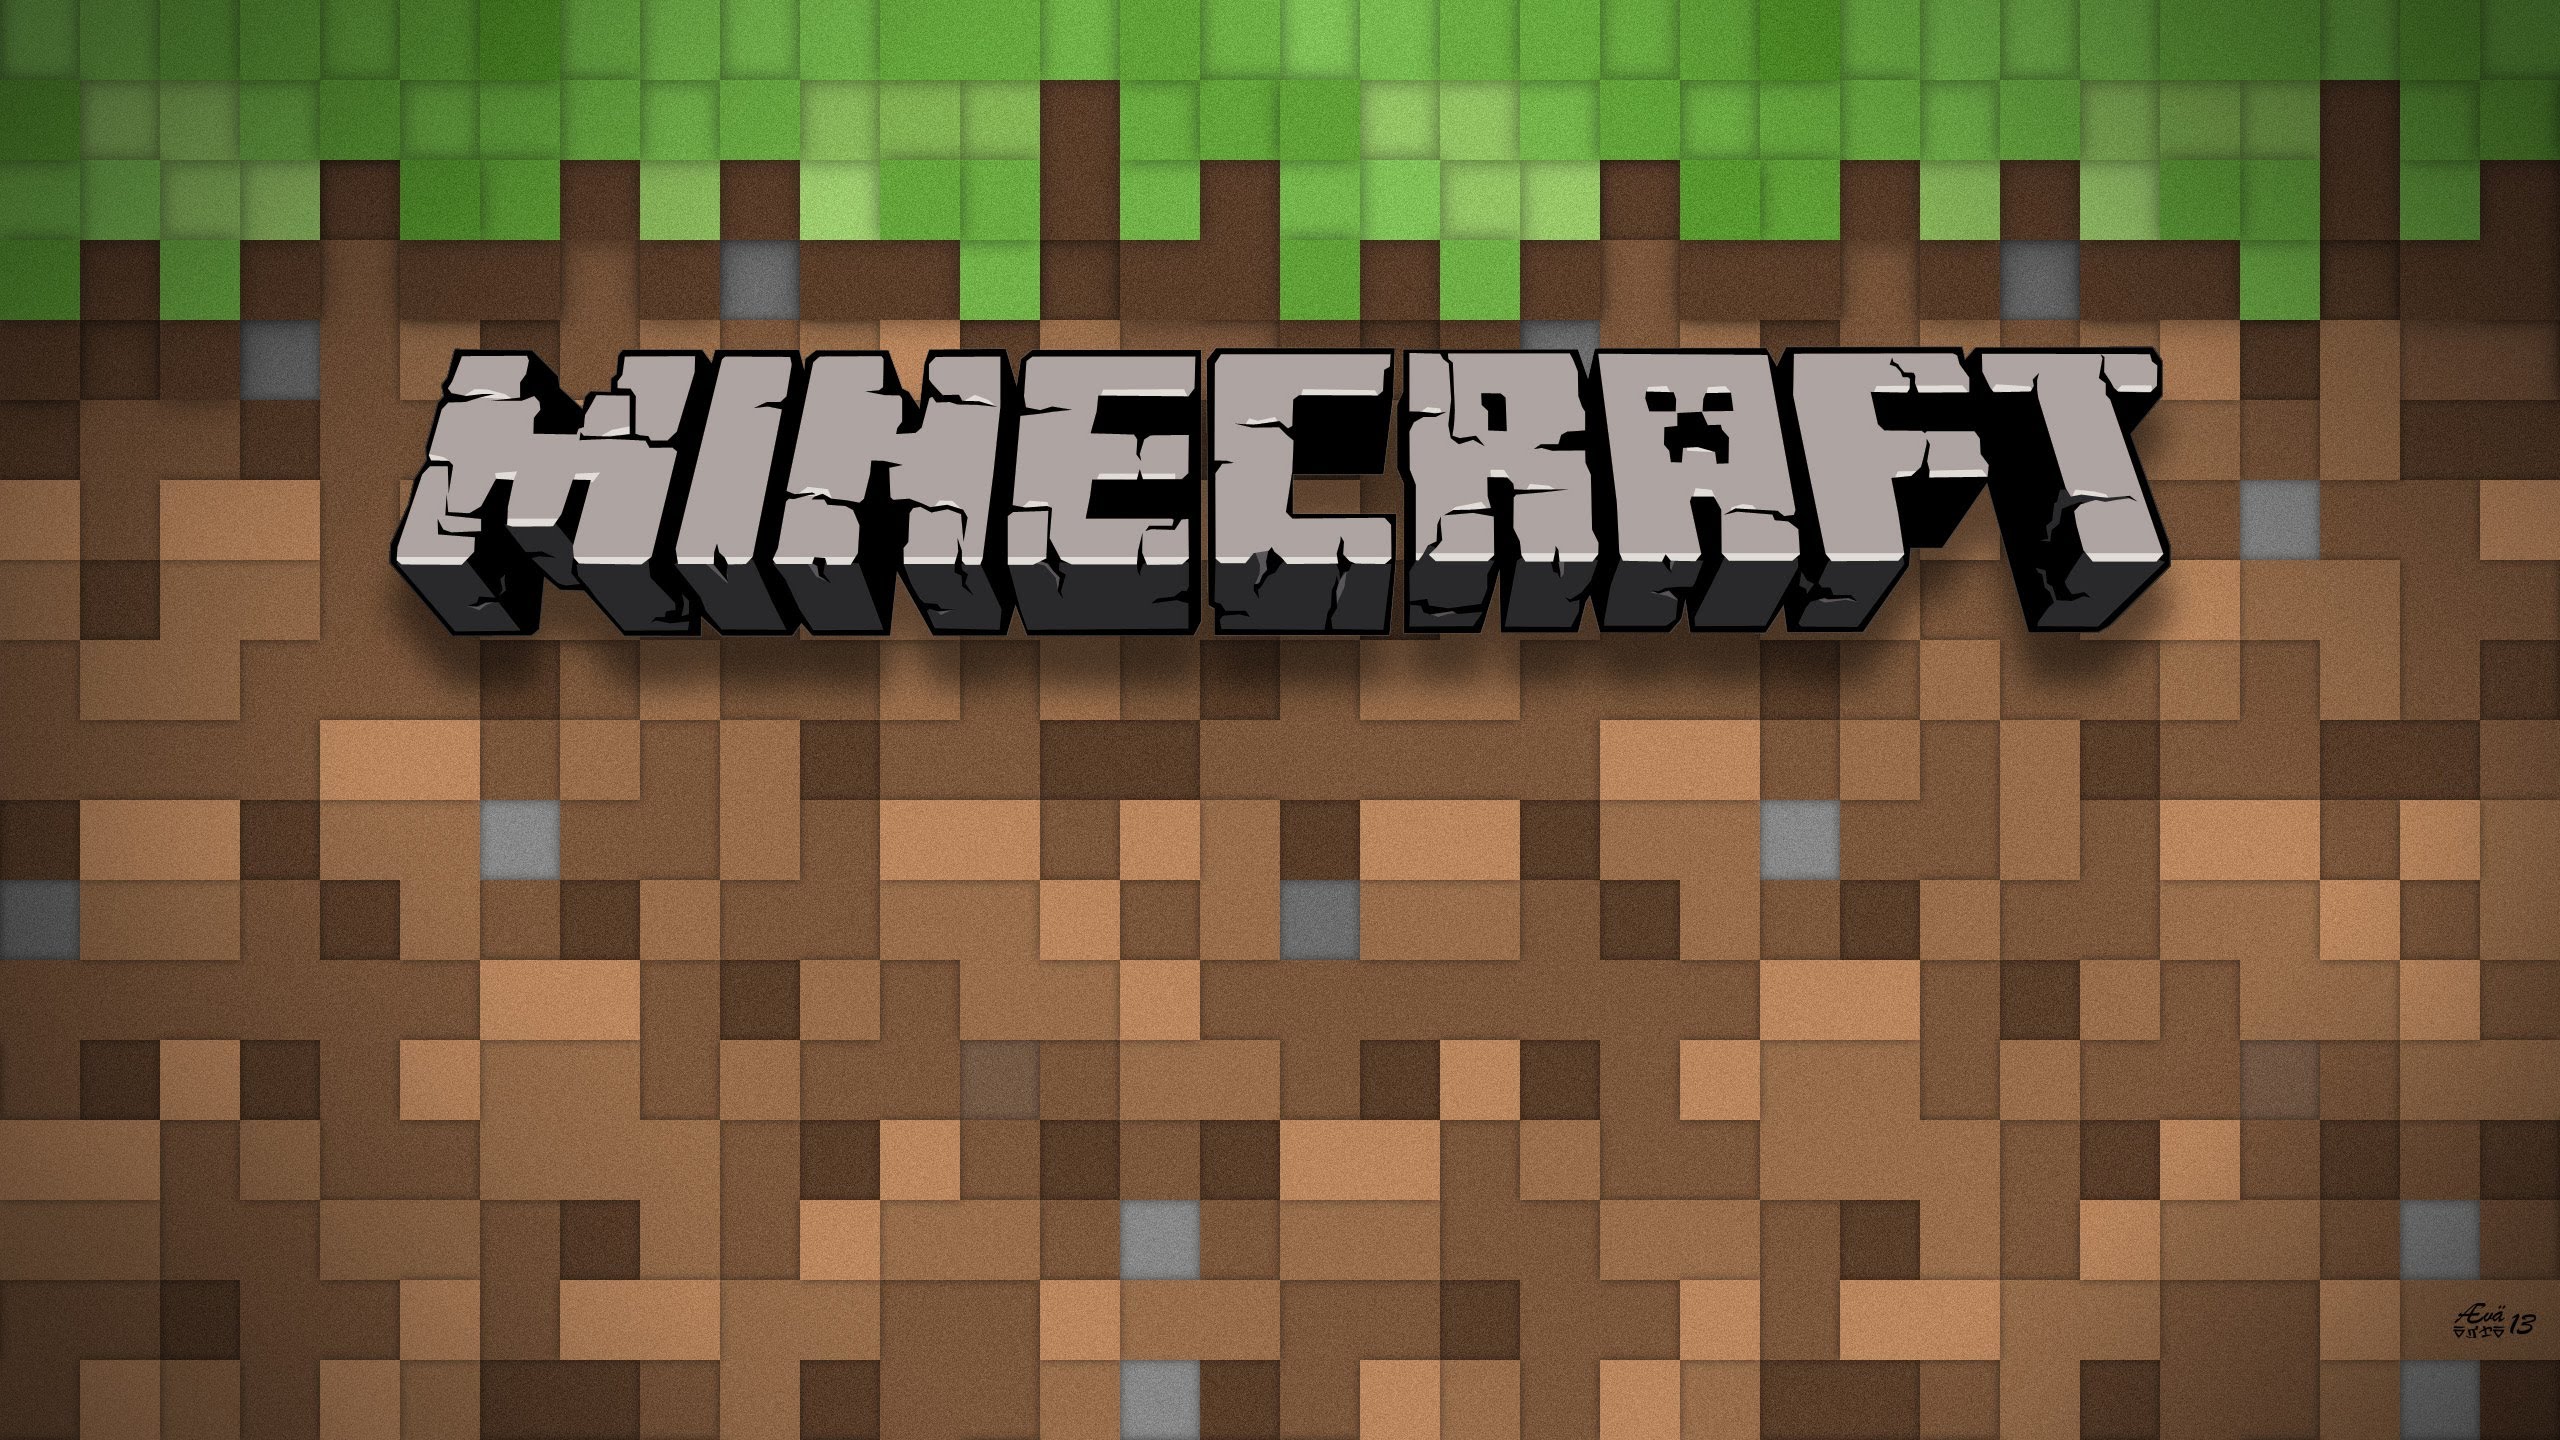 47+] Minecraft Wallpapers for YouTube - WallpaperSafari